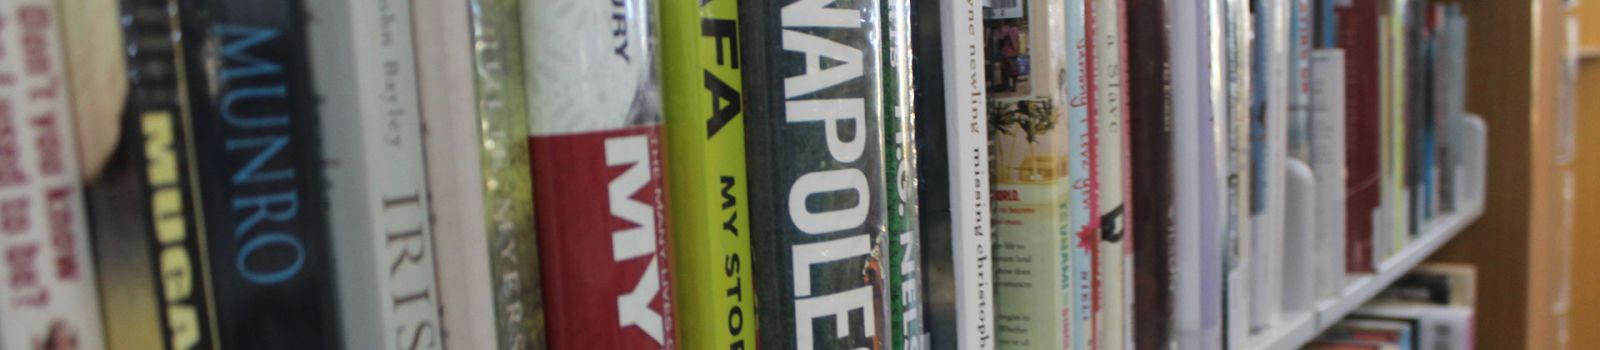 Line up of books on a shelf  banner image